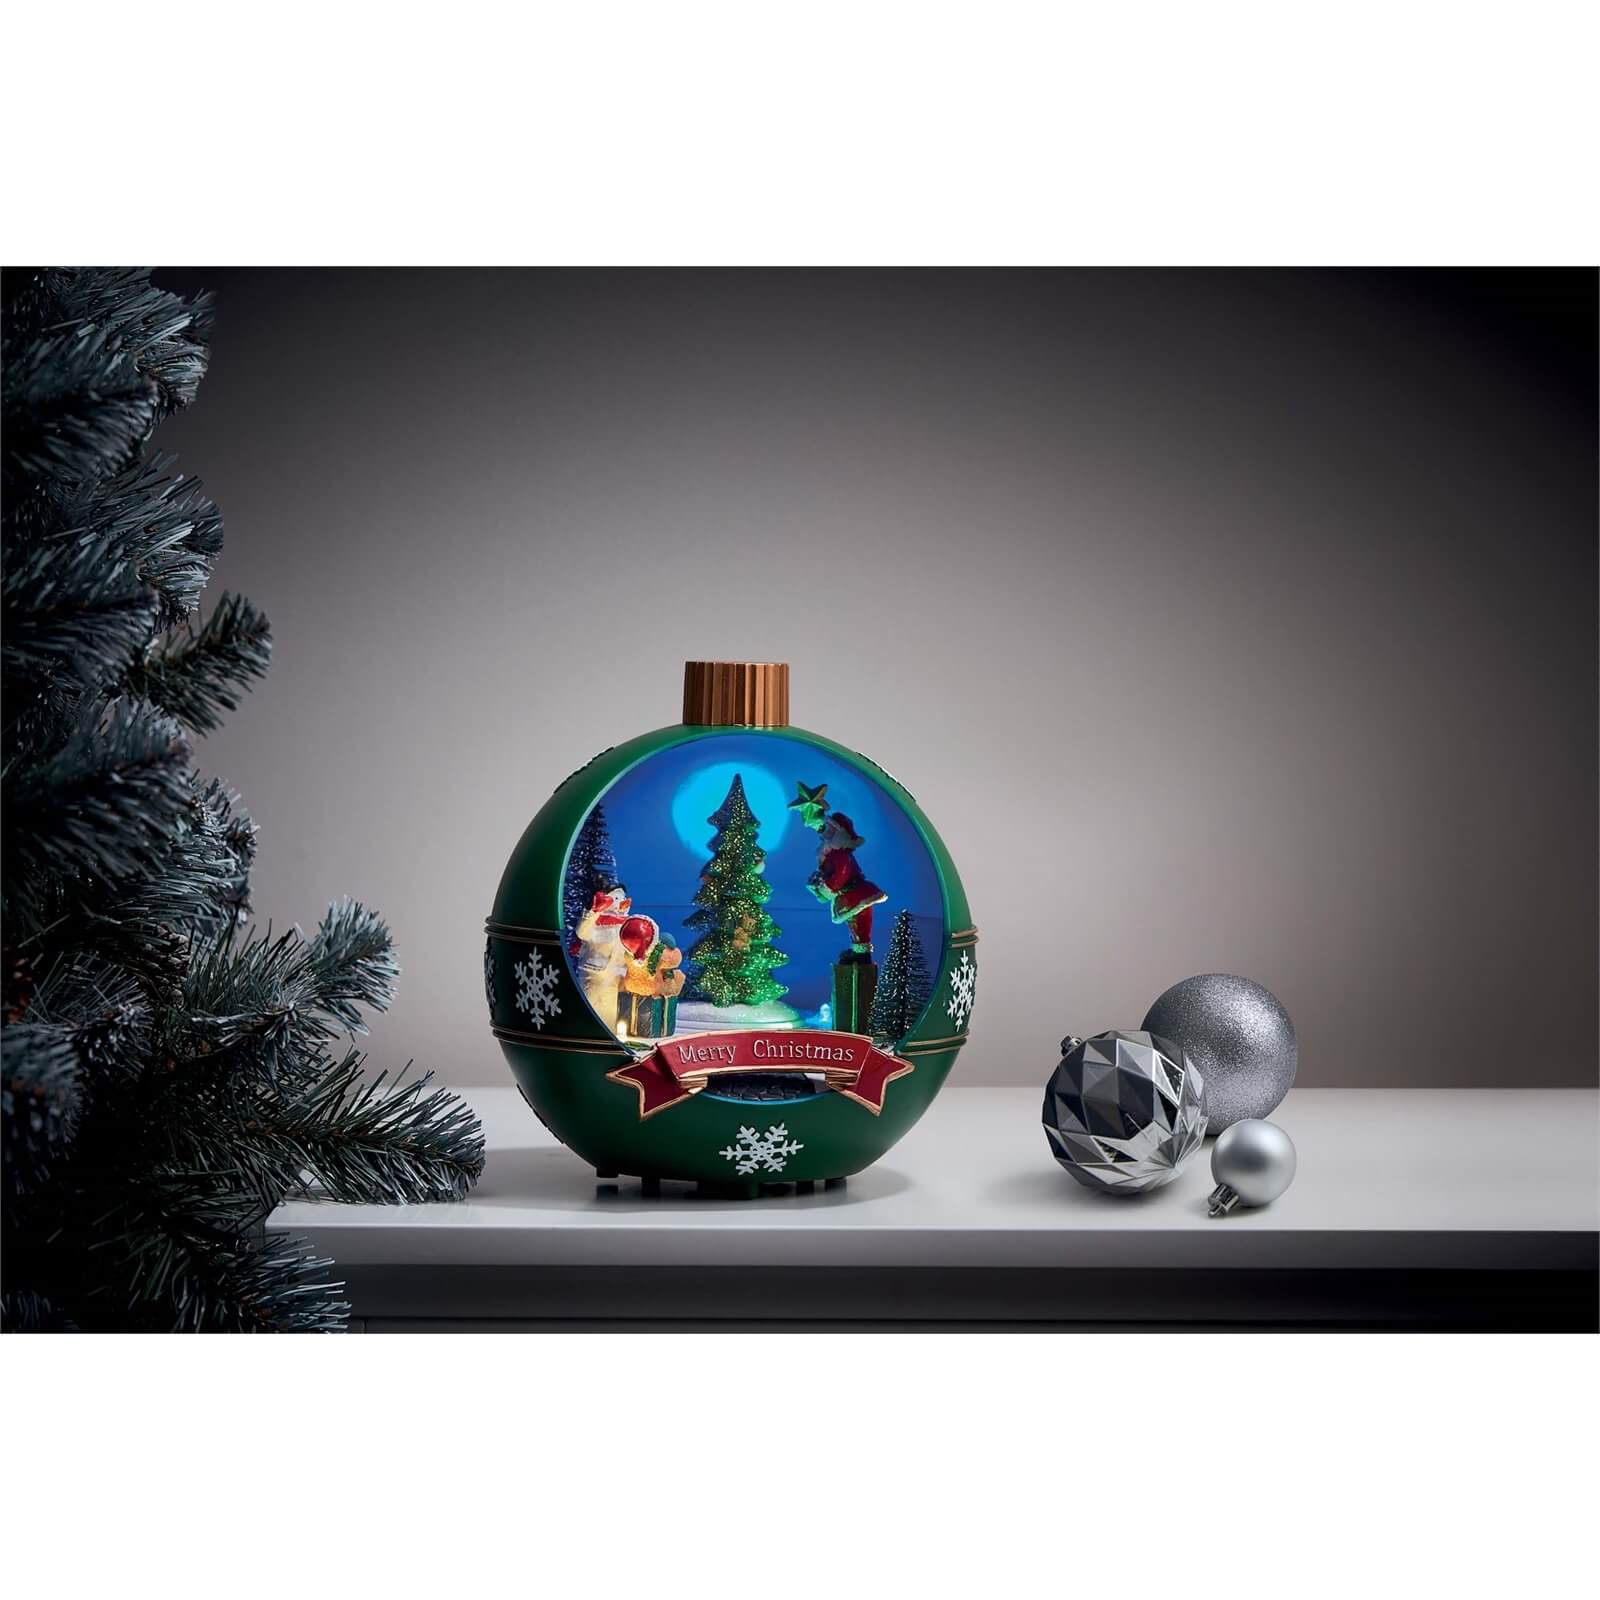 Bauble Scene Musical LED Christmas Decoration - Battery Operated